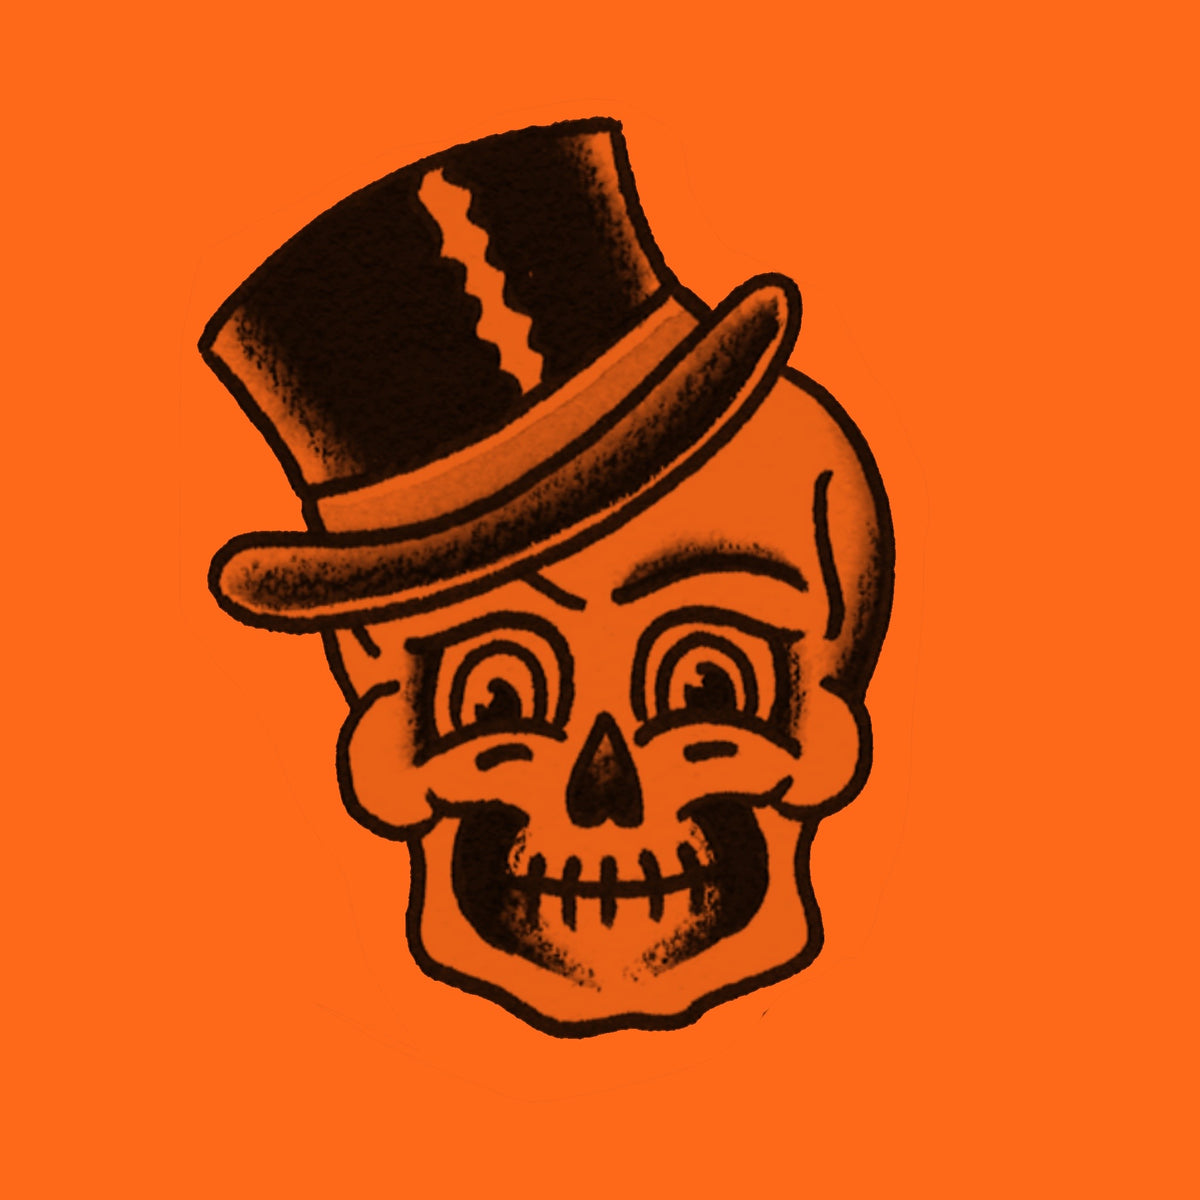 skull with hat